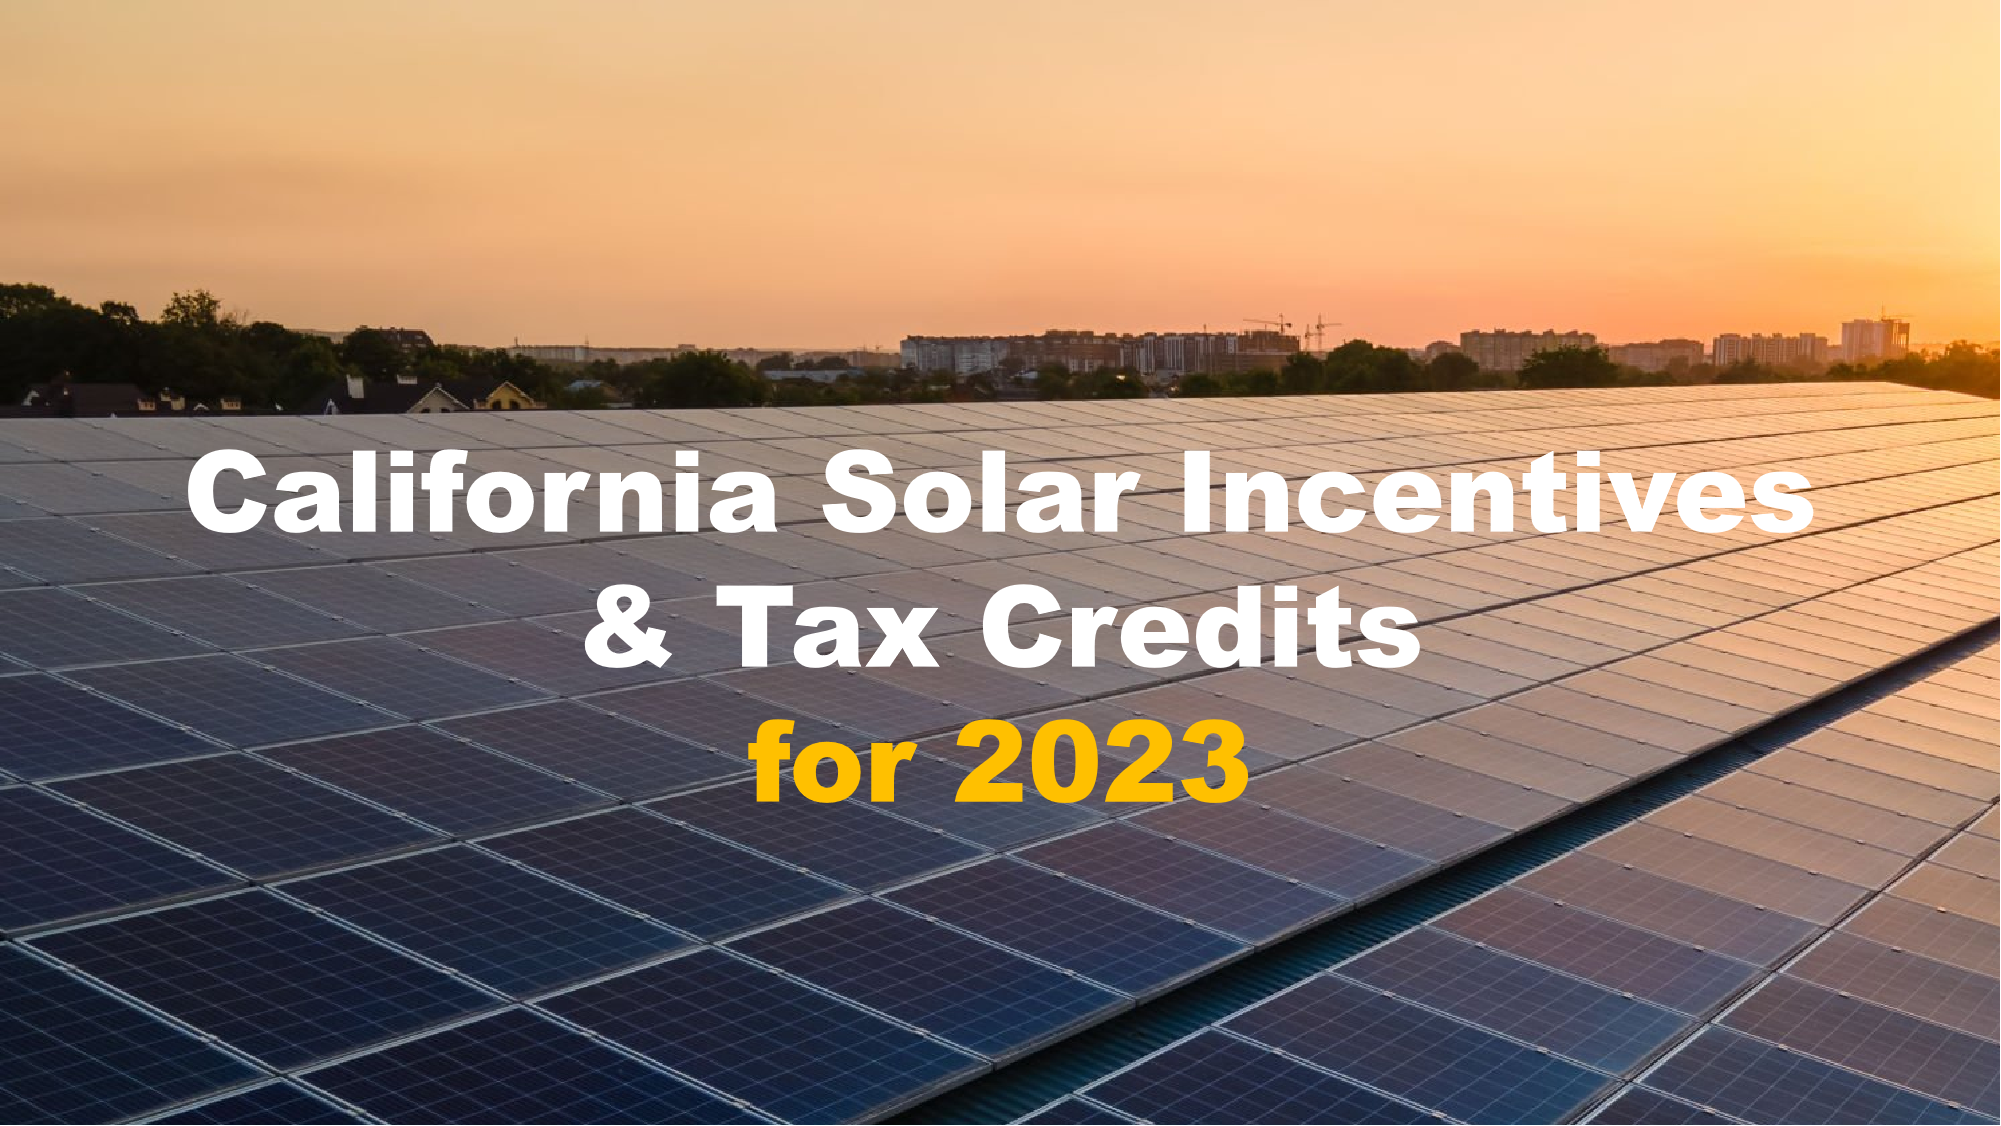 California Solar Incentives and Tax Credits for 2023